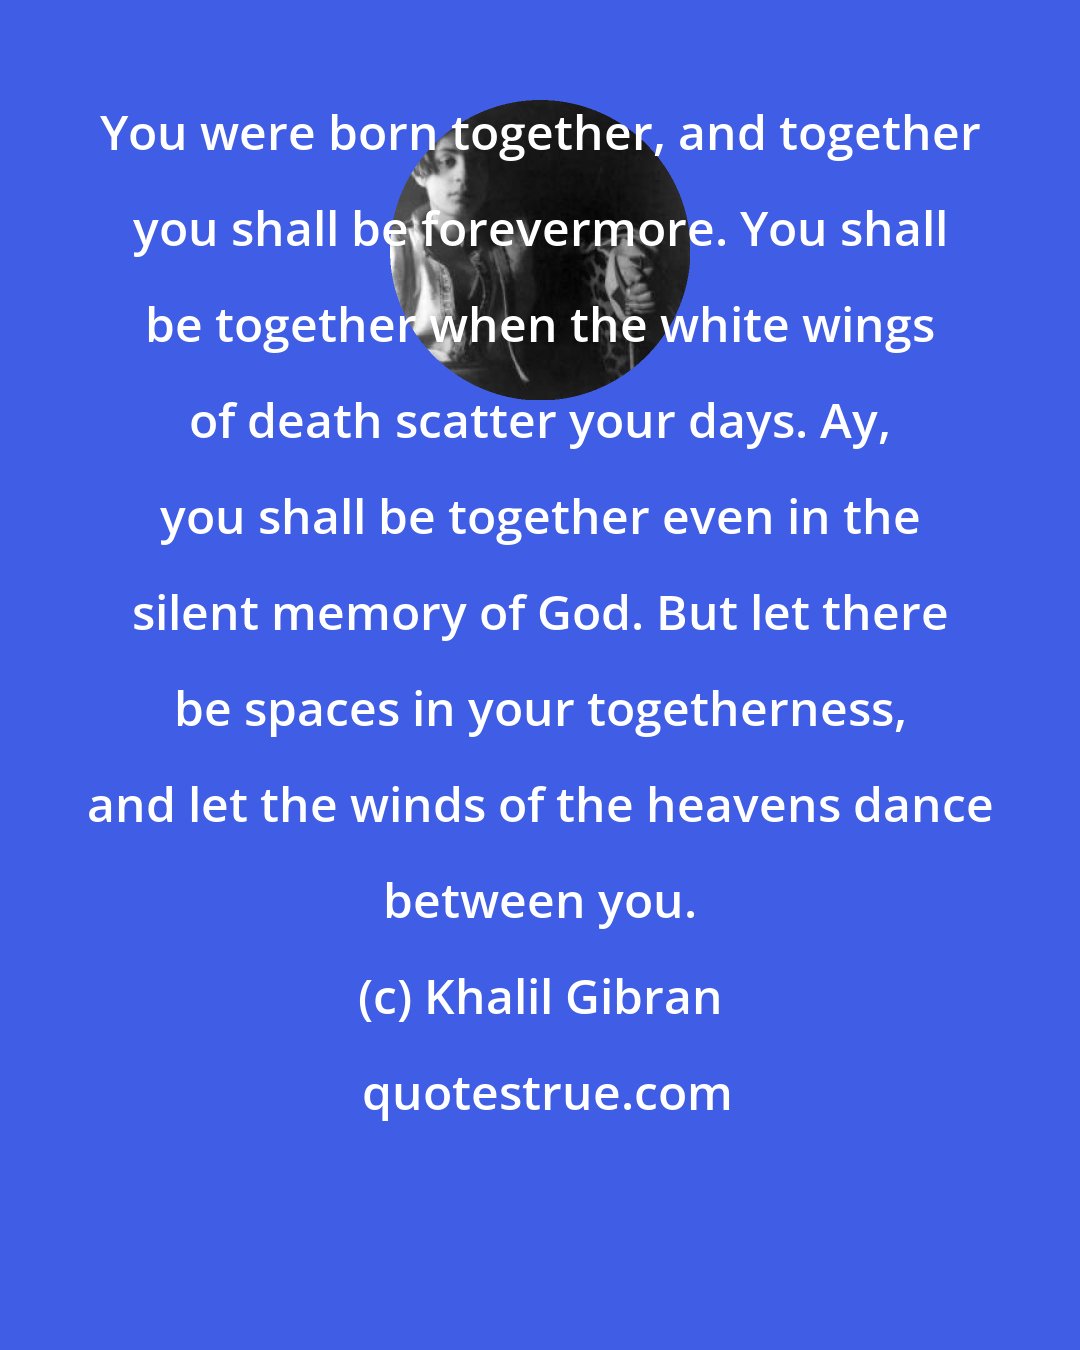 Khalil Gibran: You were born together, and together you shall be forevermore. You shall be together when the white wings of death scatter your days. Ay, you shall be together even in the silent memory of God. But let there be spaces in your togetherness, and let the winds of the heavens dance between you.